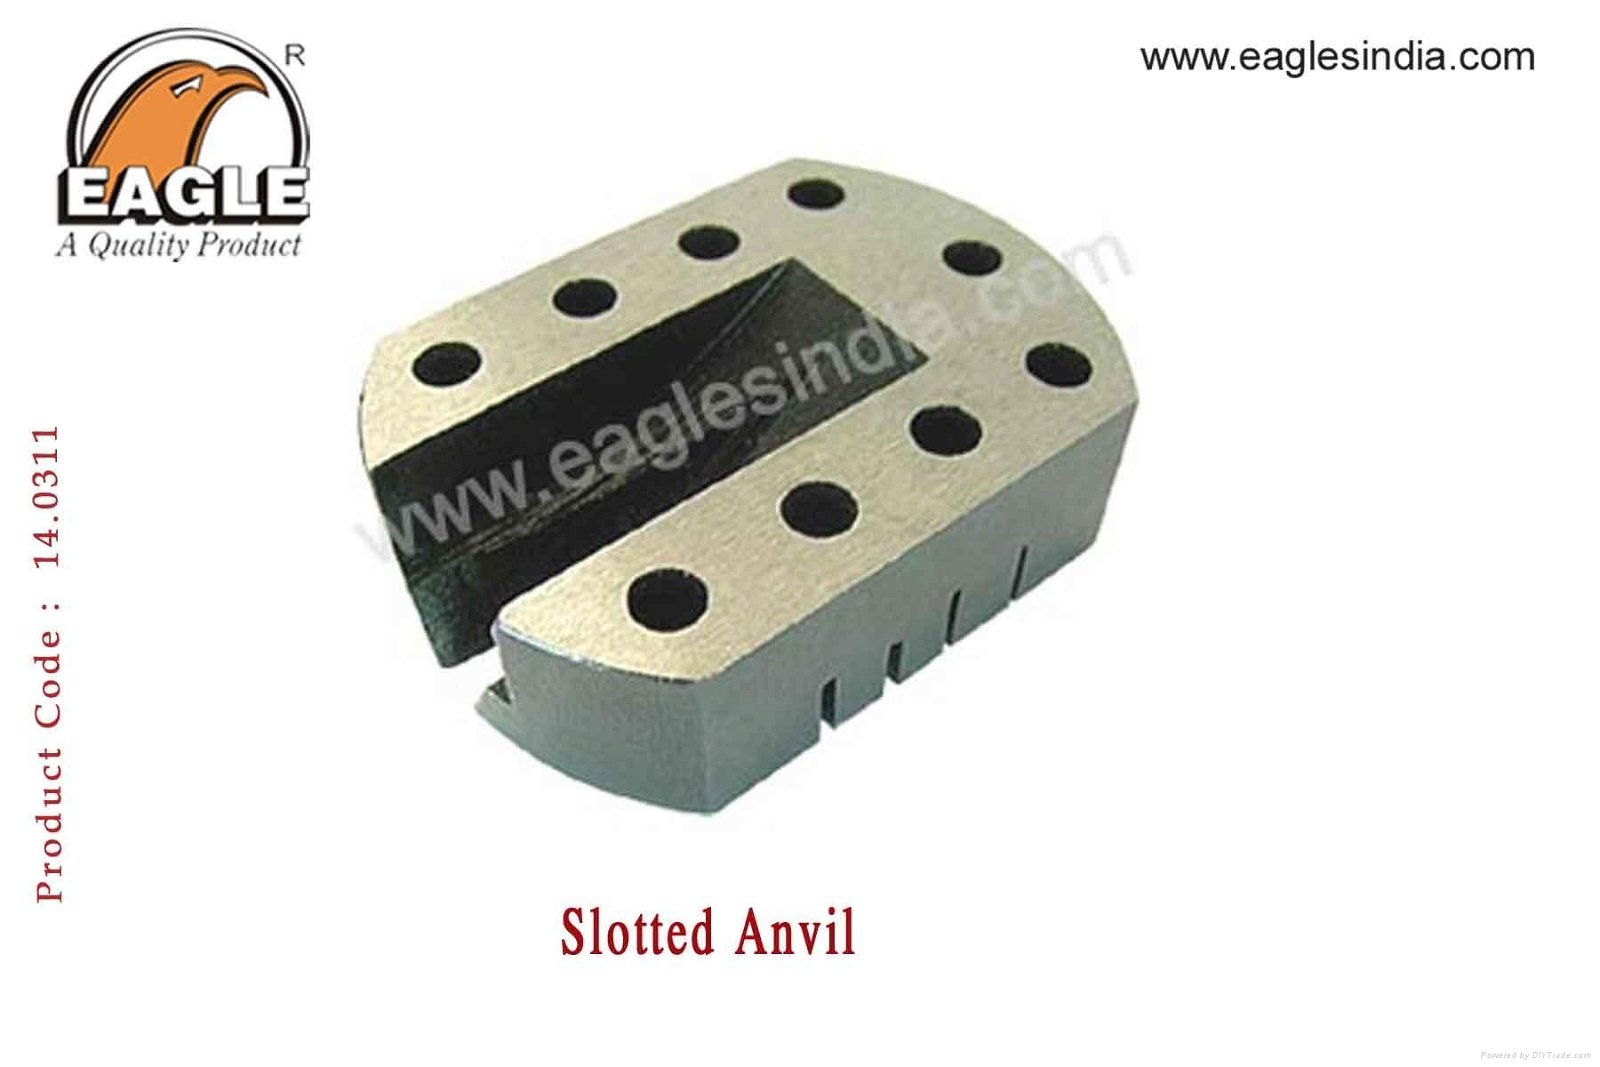 Slotted anvill